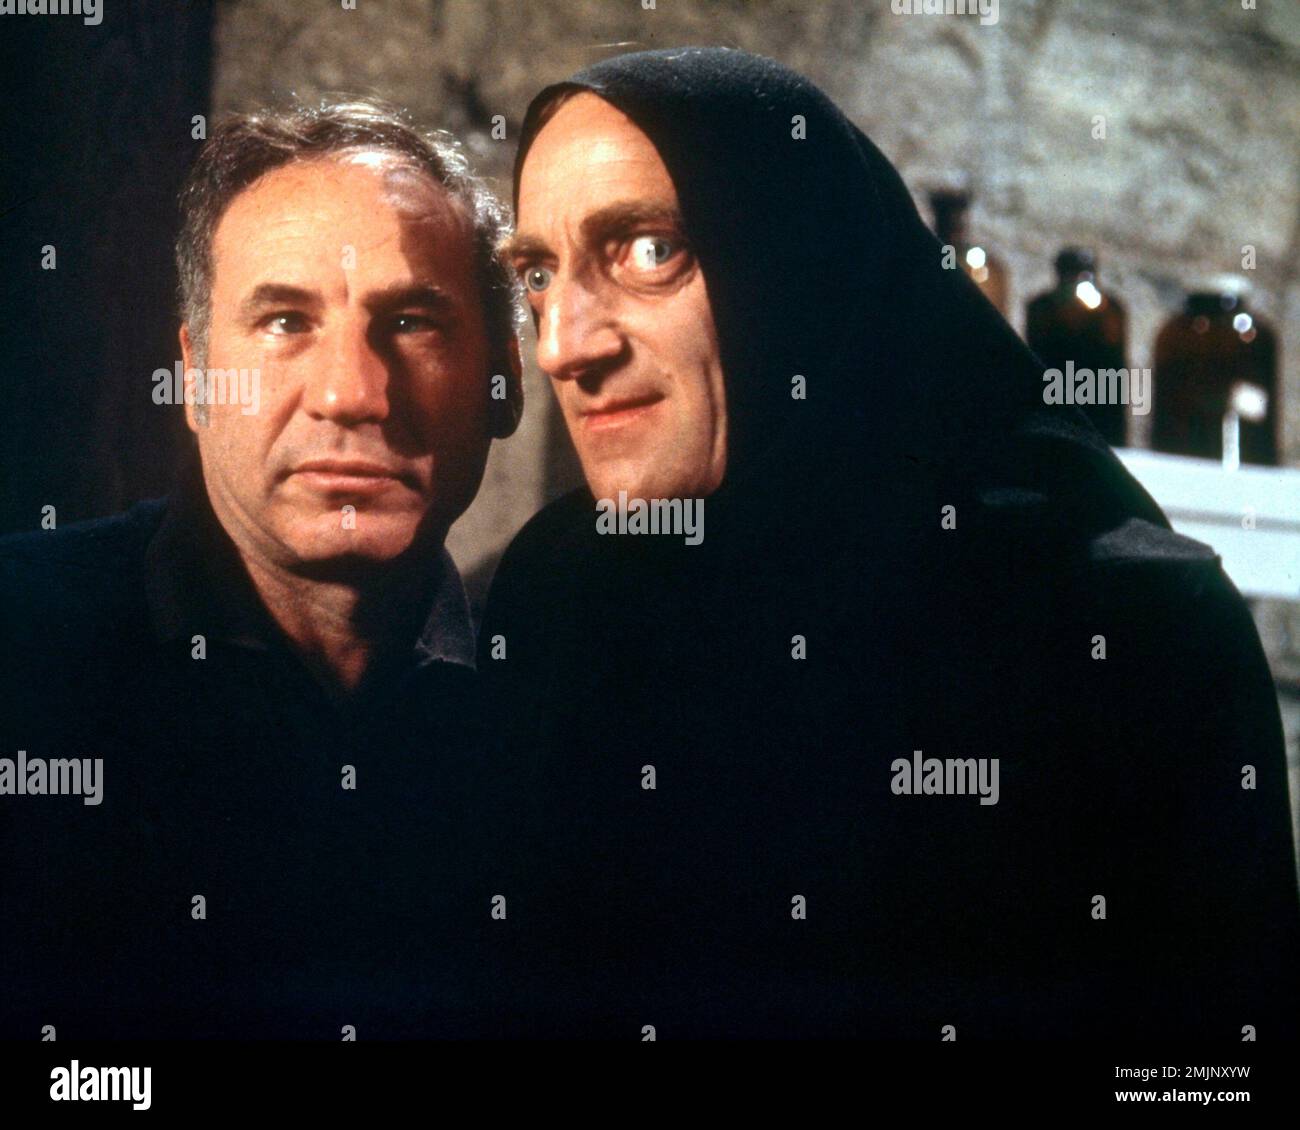 MEL BROOKS and MARTY FELDMAN in YOUNG FRANKENSTEIN (1974), directed by MEL BROOKS. Credit: 20TH CENTURY FOX / Album Stock Photo